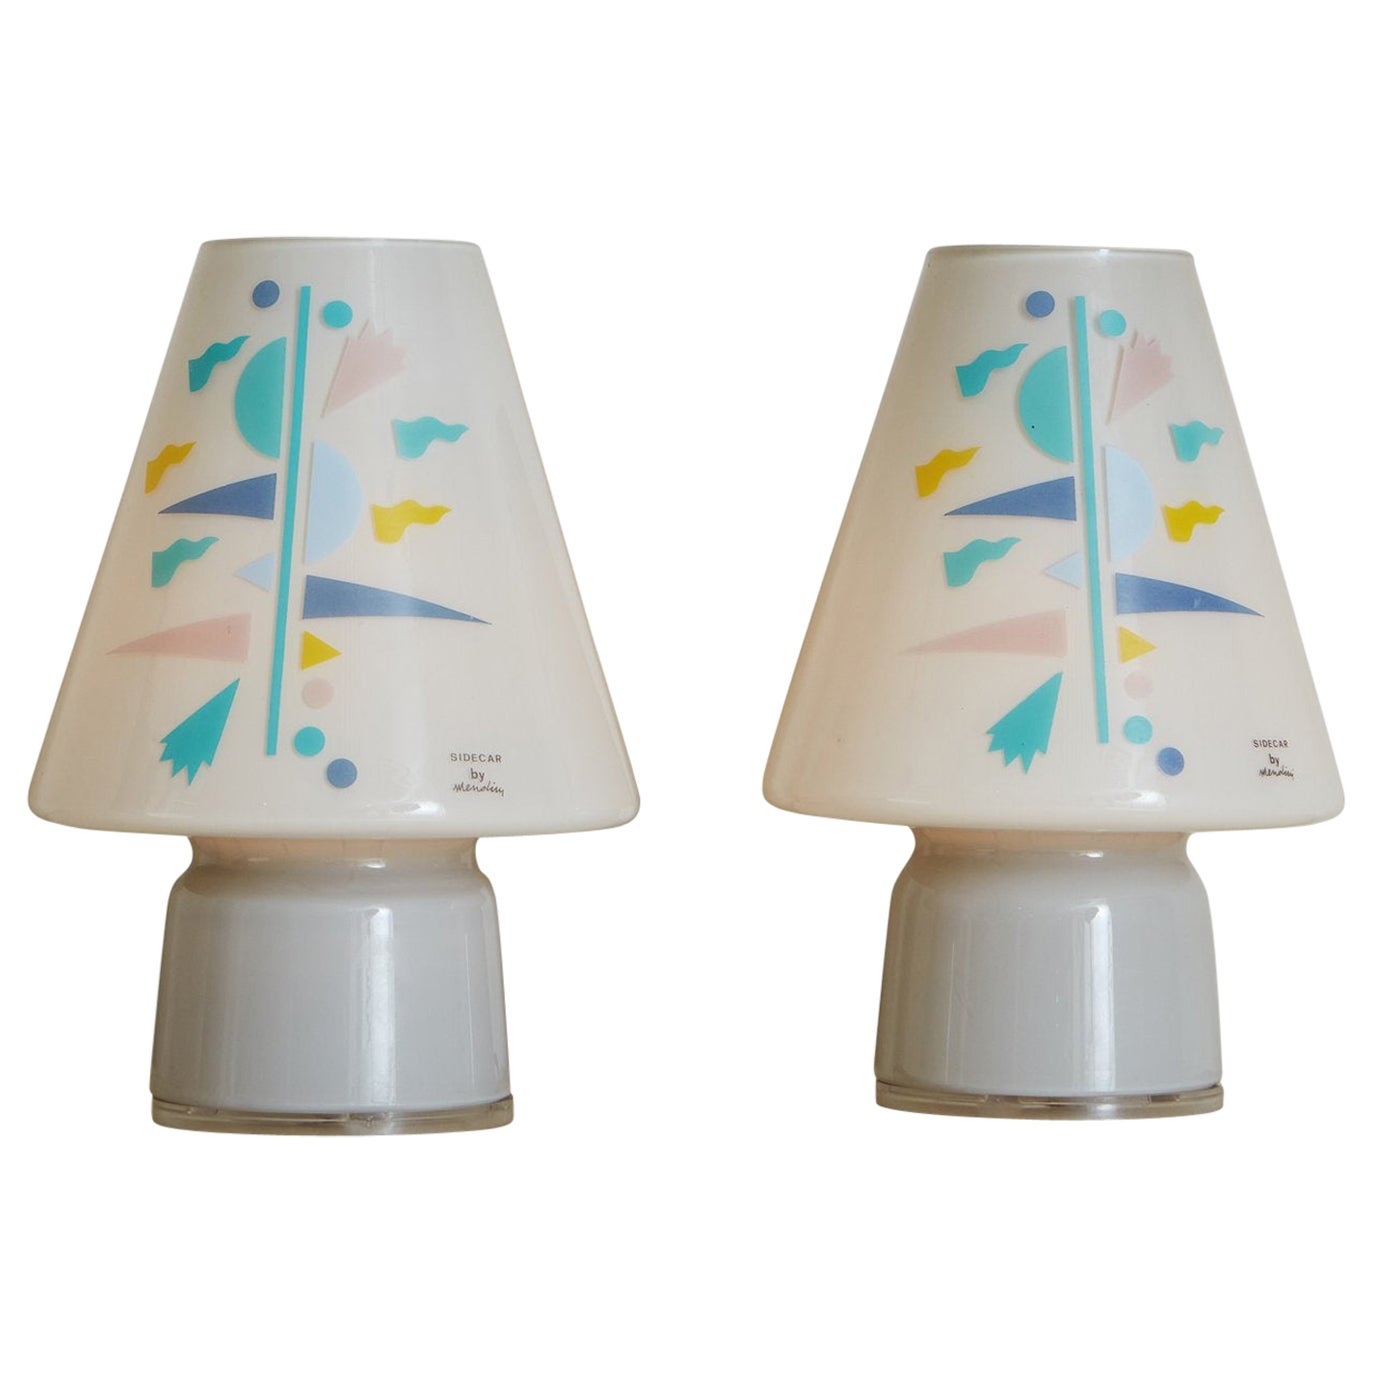 Pair of Glass Sidecar Lamps by Alessandro Mendini for Artemide, France, 1980s